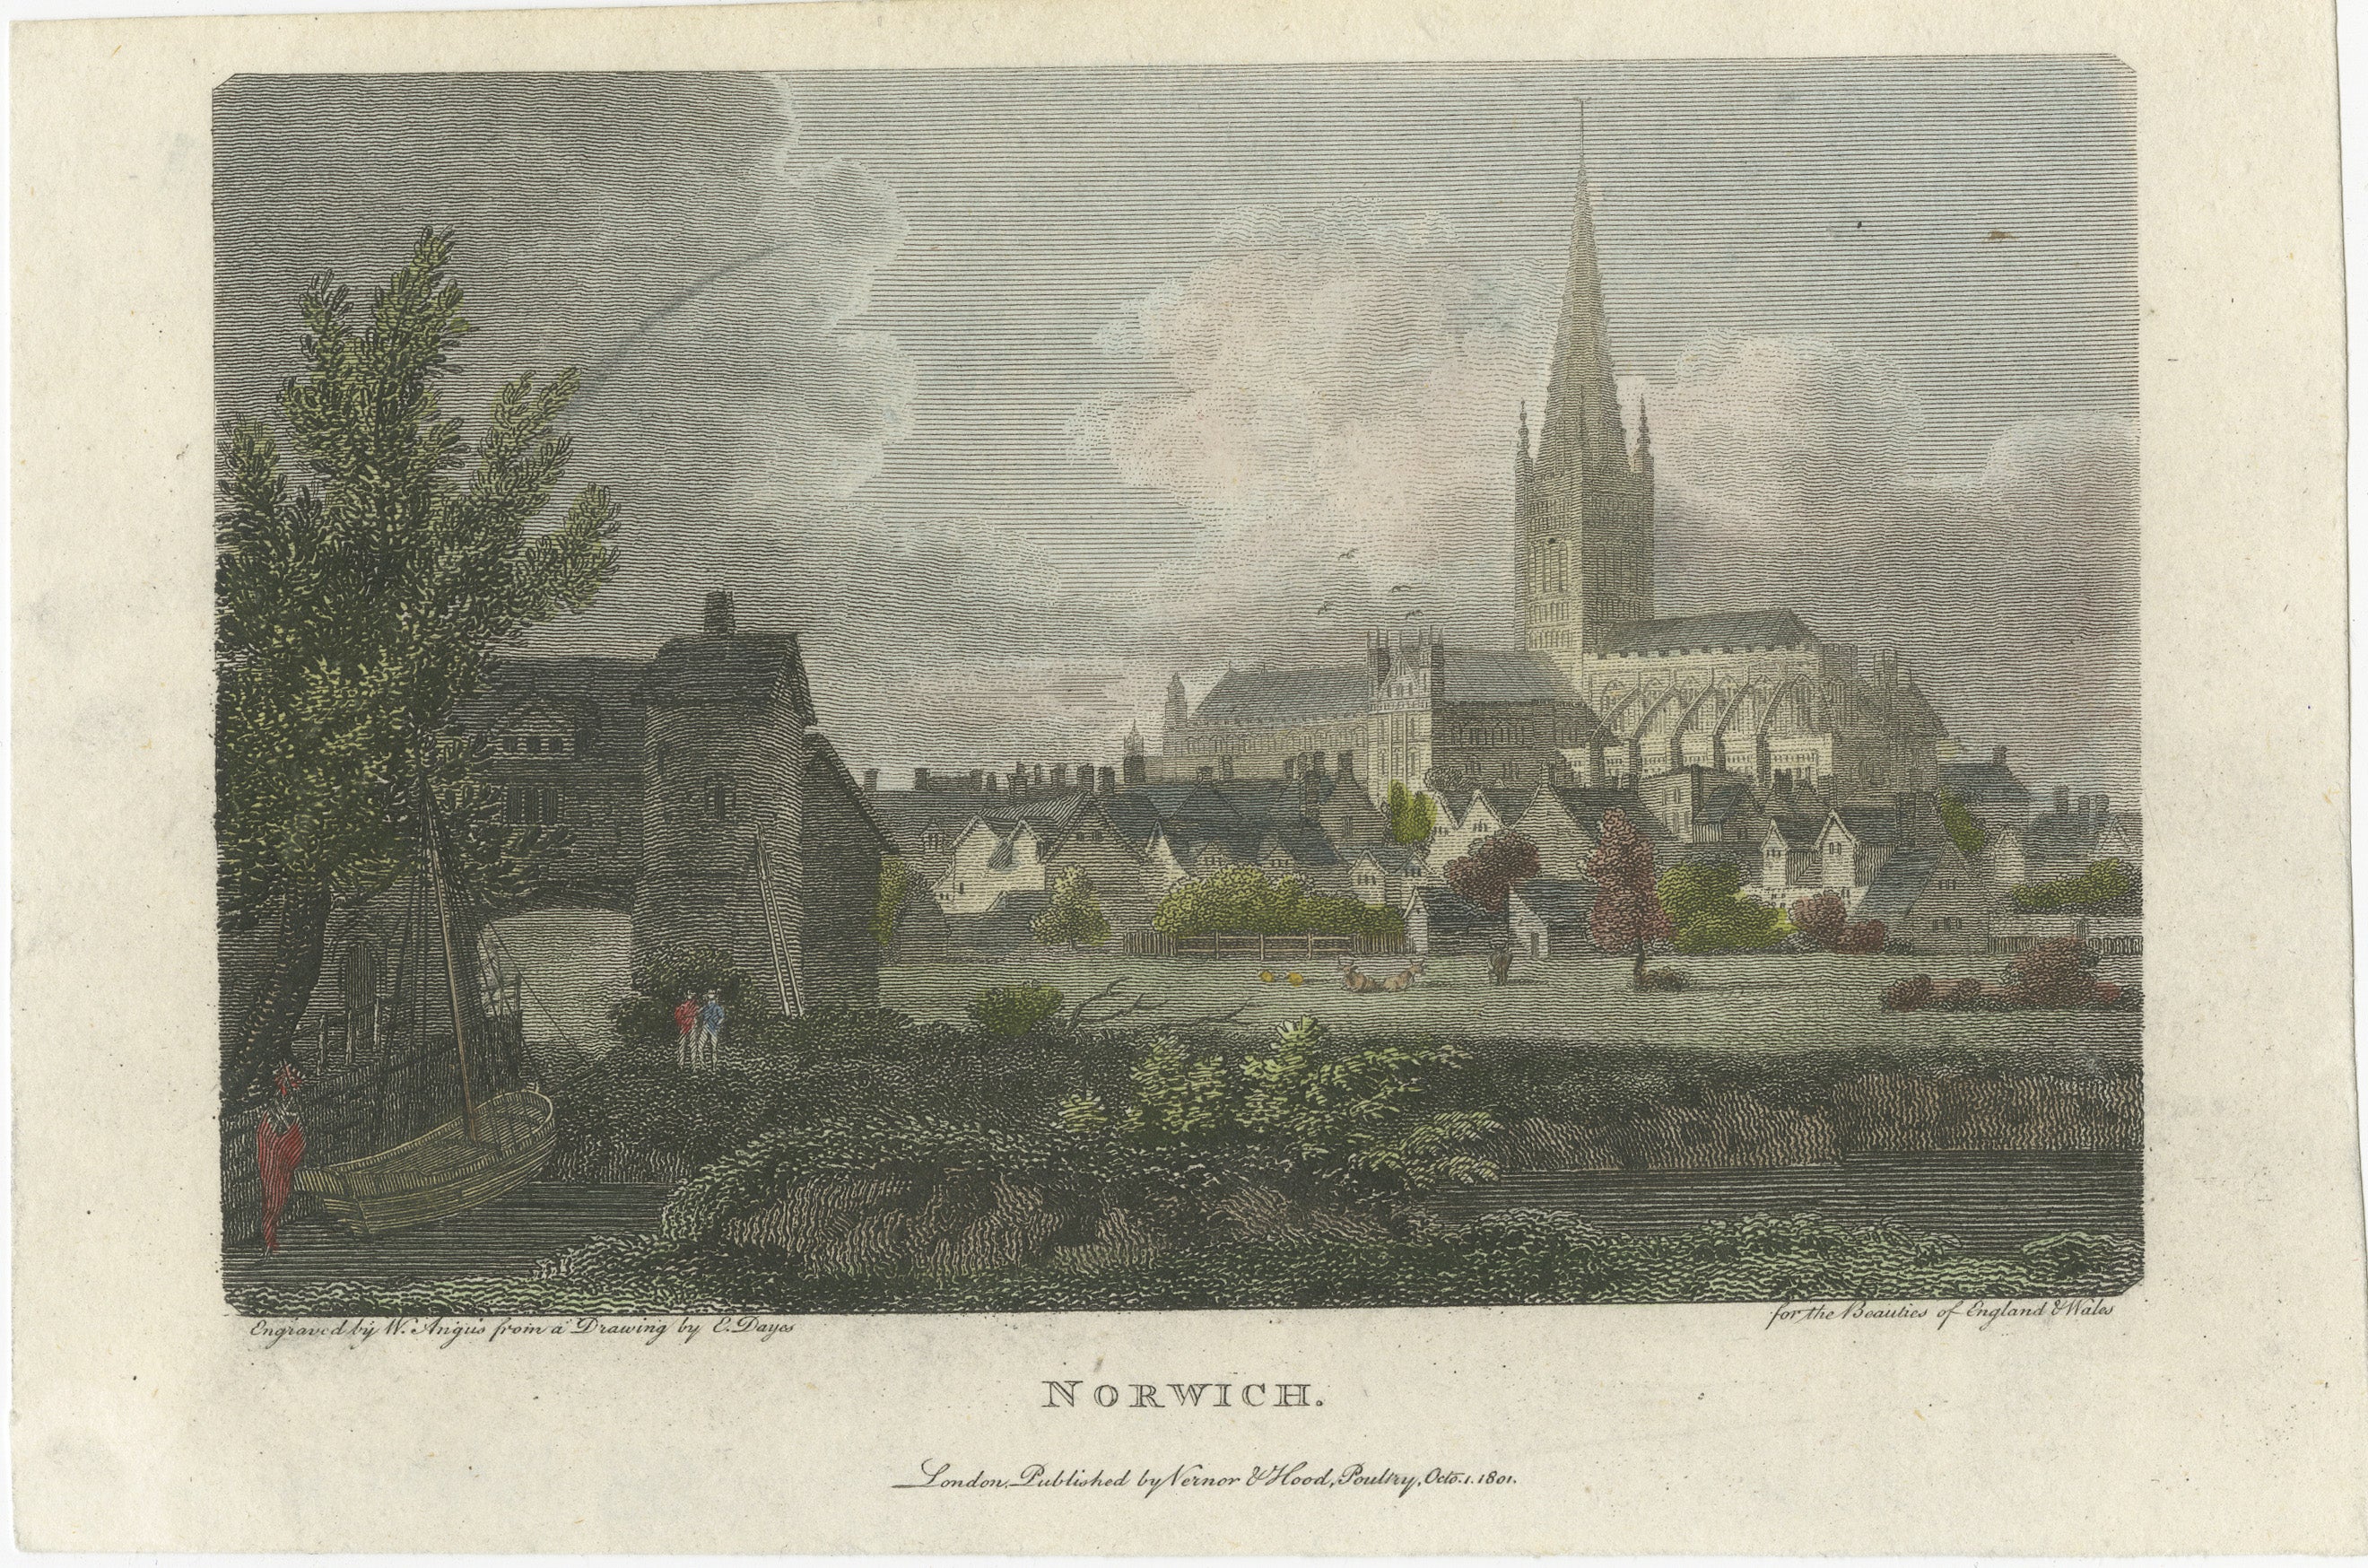 An original hand-colored engraving of Norwich in England. 

The text within the image provides several pieces of information about the print:

1. 